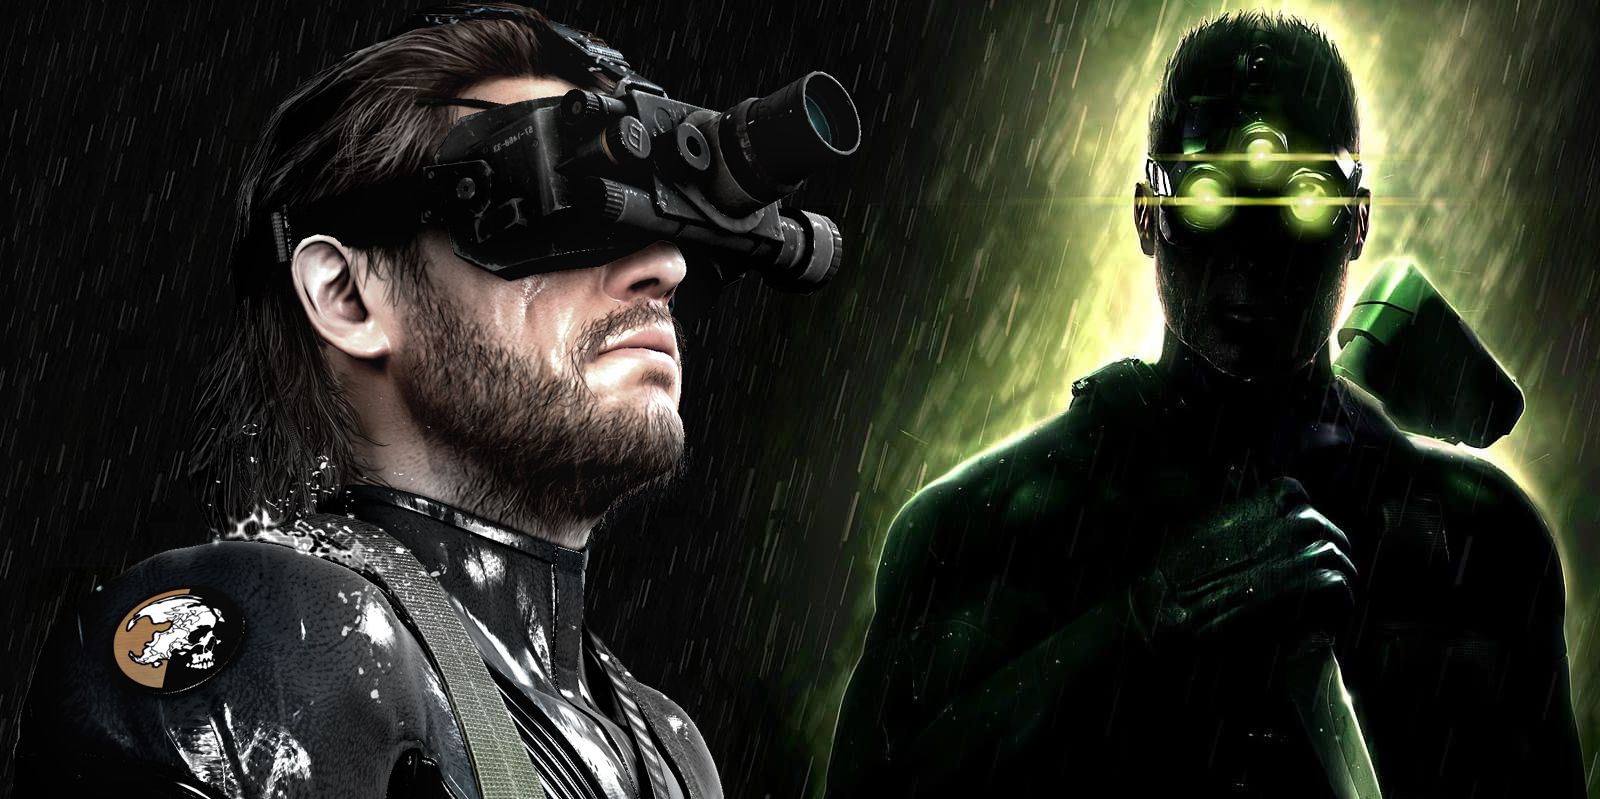 Splinter Cell's Sam Fisher and Metal Gear's Big Boss together.